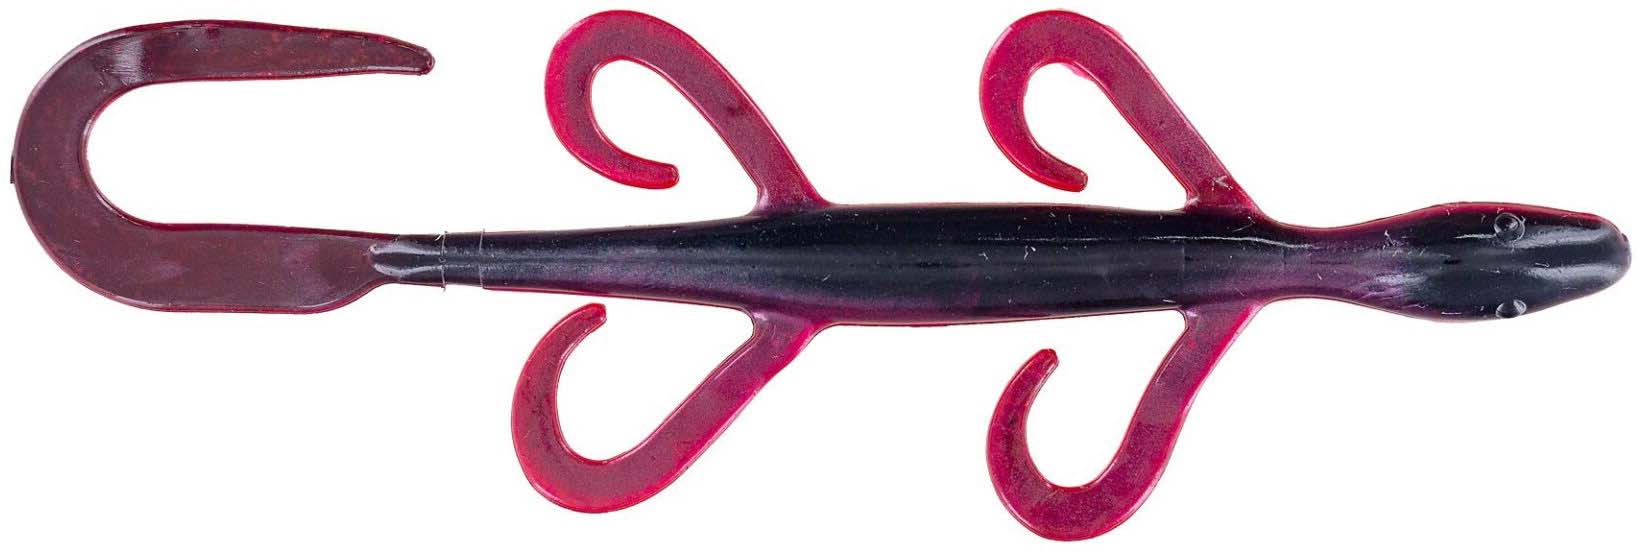 Big Bite Baits BFE 4 1/2 inch Soft Plastic Creature Bait 6 pack — Discount  Tackle